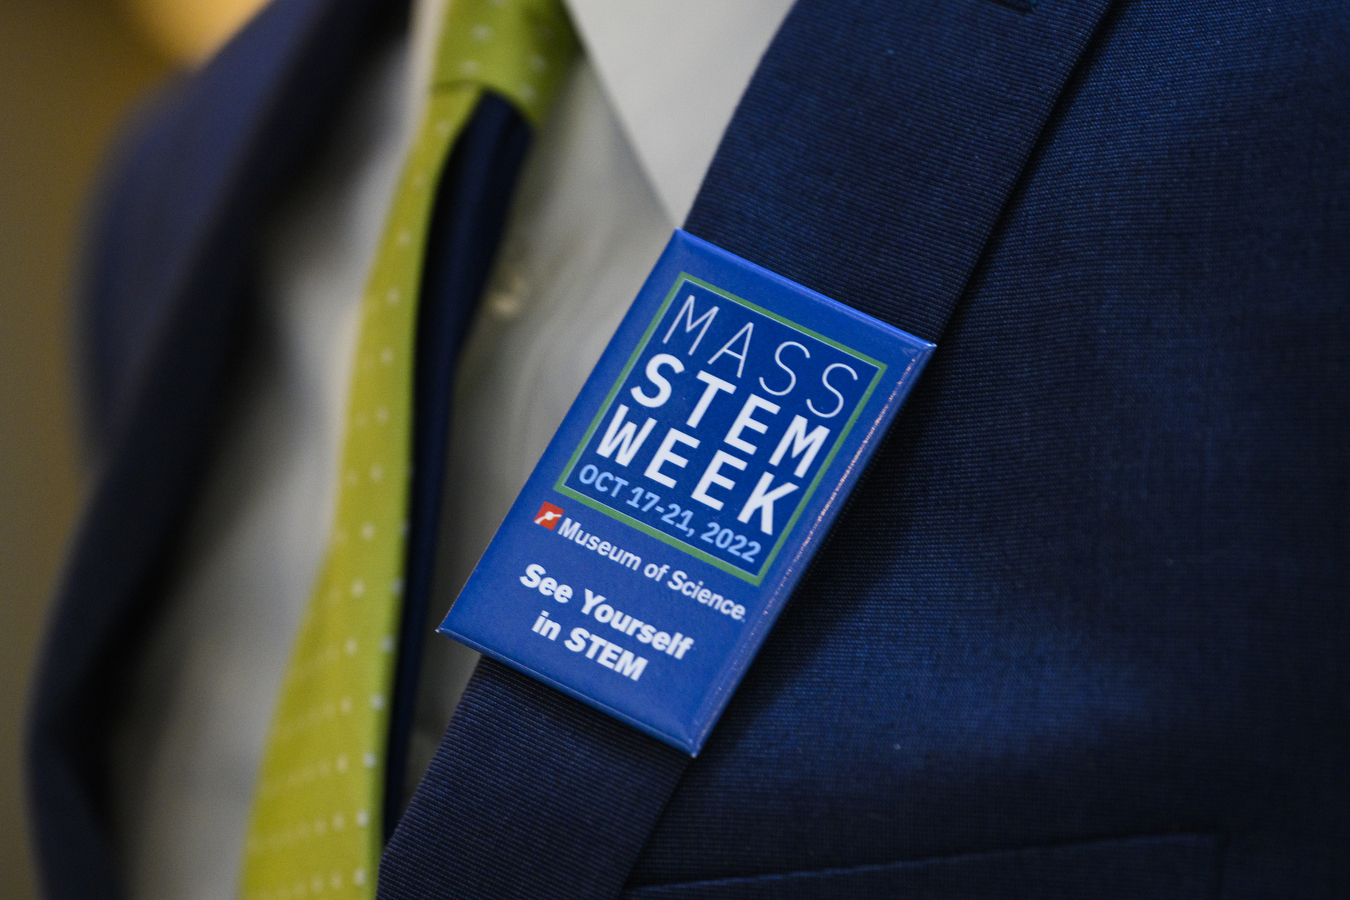 A blue pin is displayed with white text" "MASS STEM Week 2022."